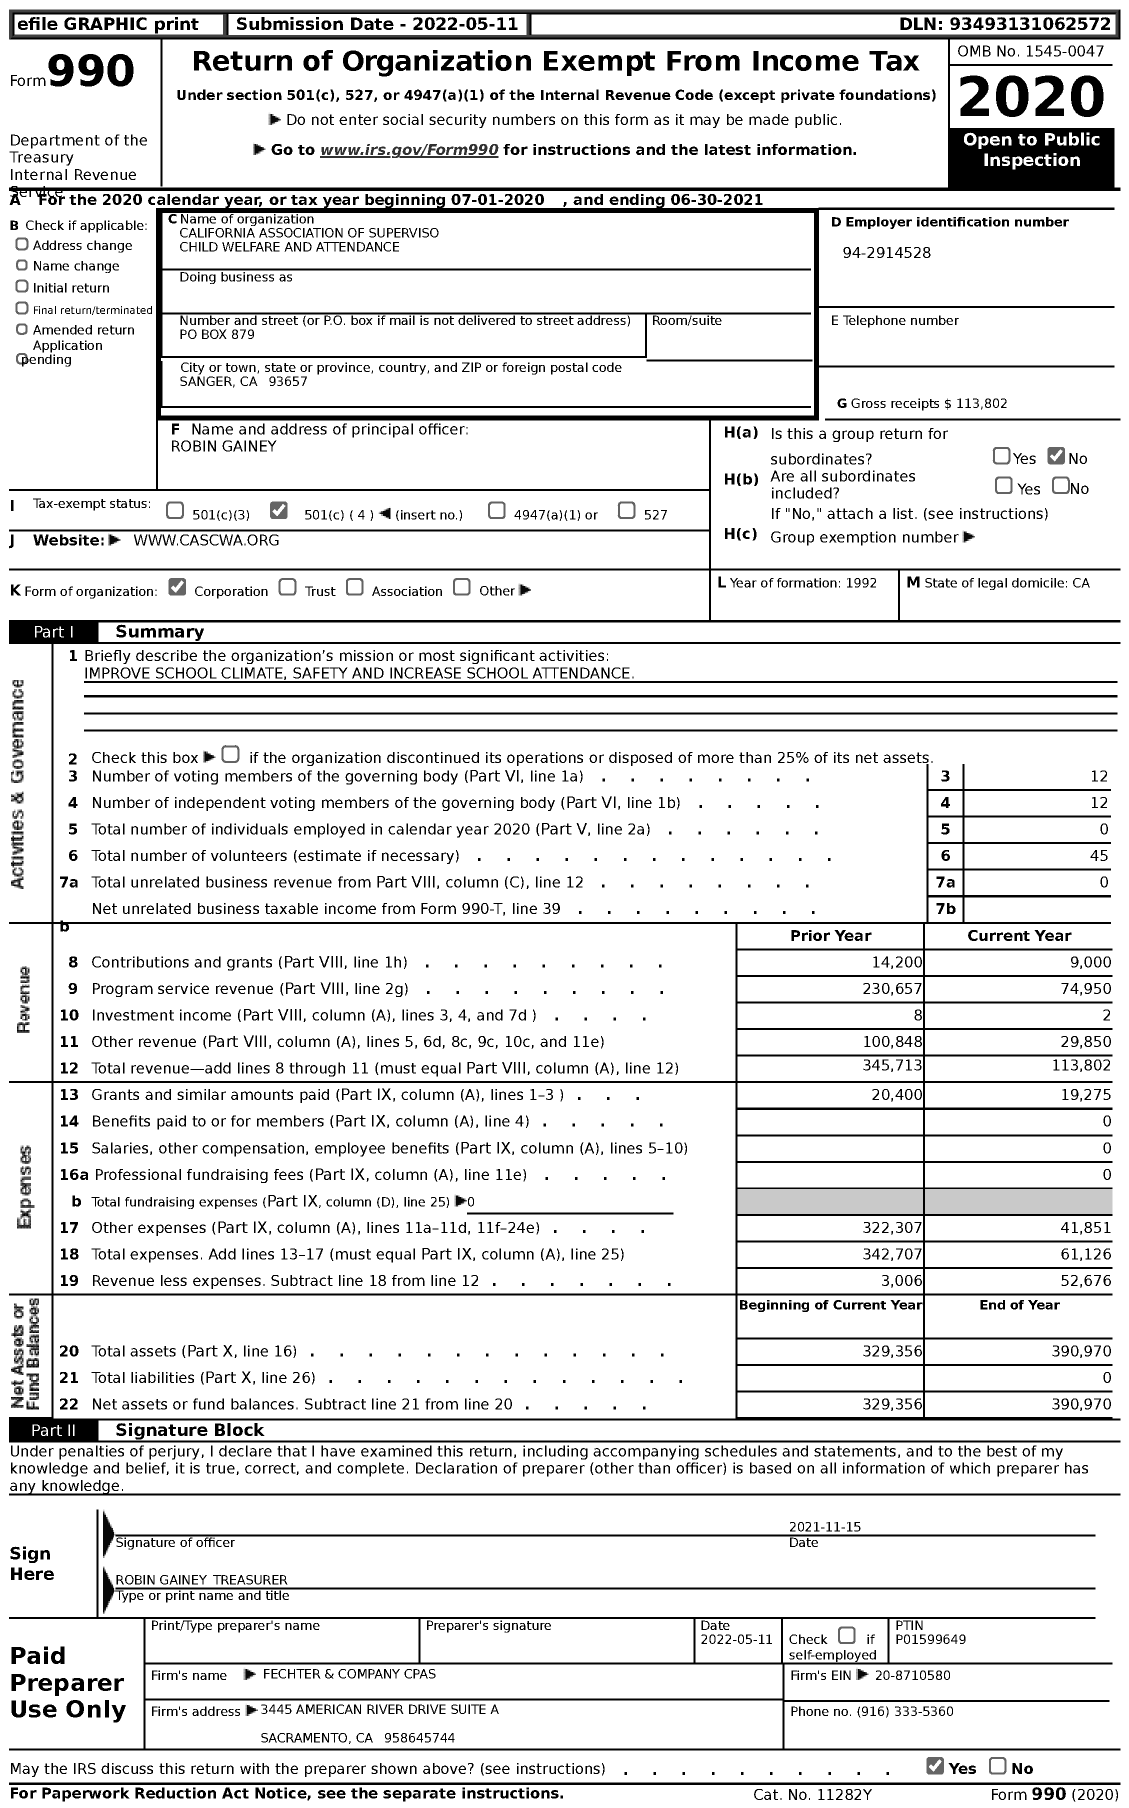 Image of first page of 2020 Form 990 for California Association of Supervisors Child Welfare and Attendance